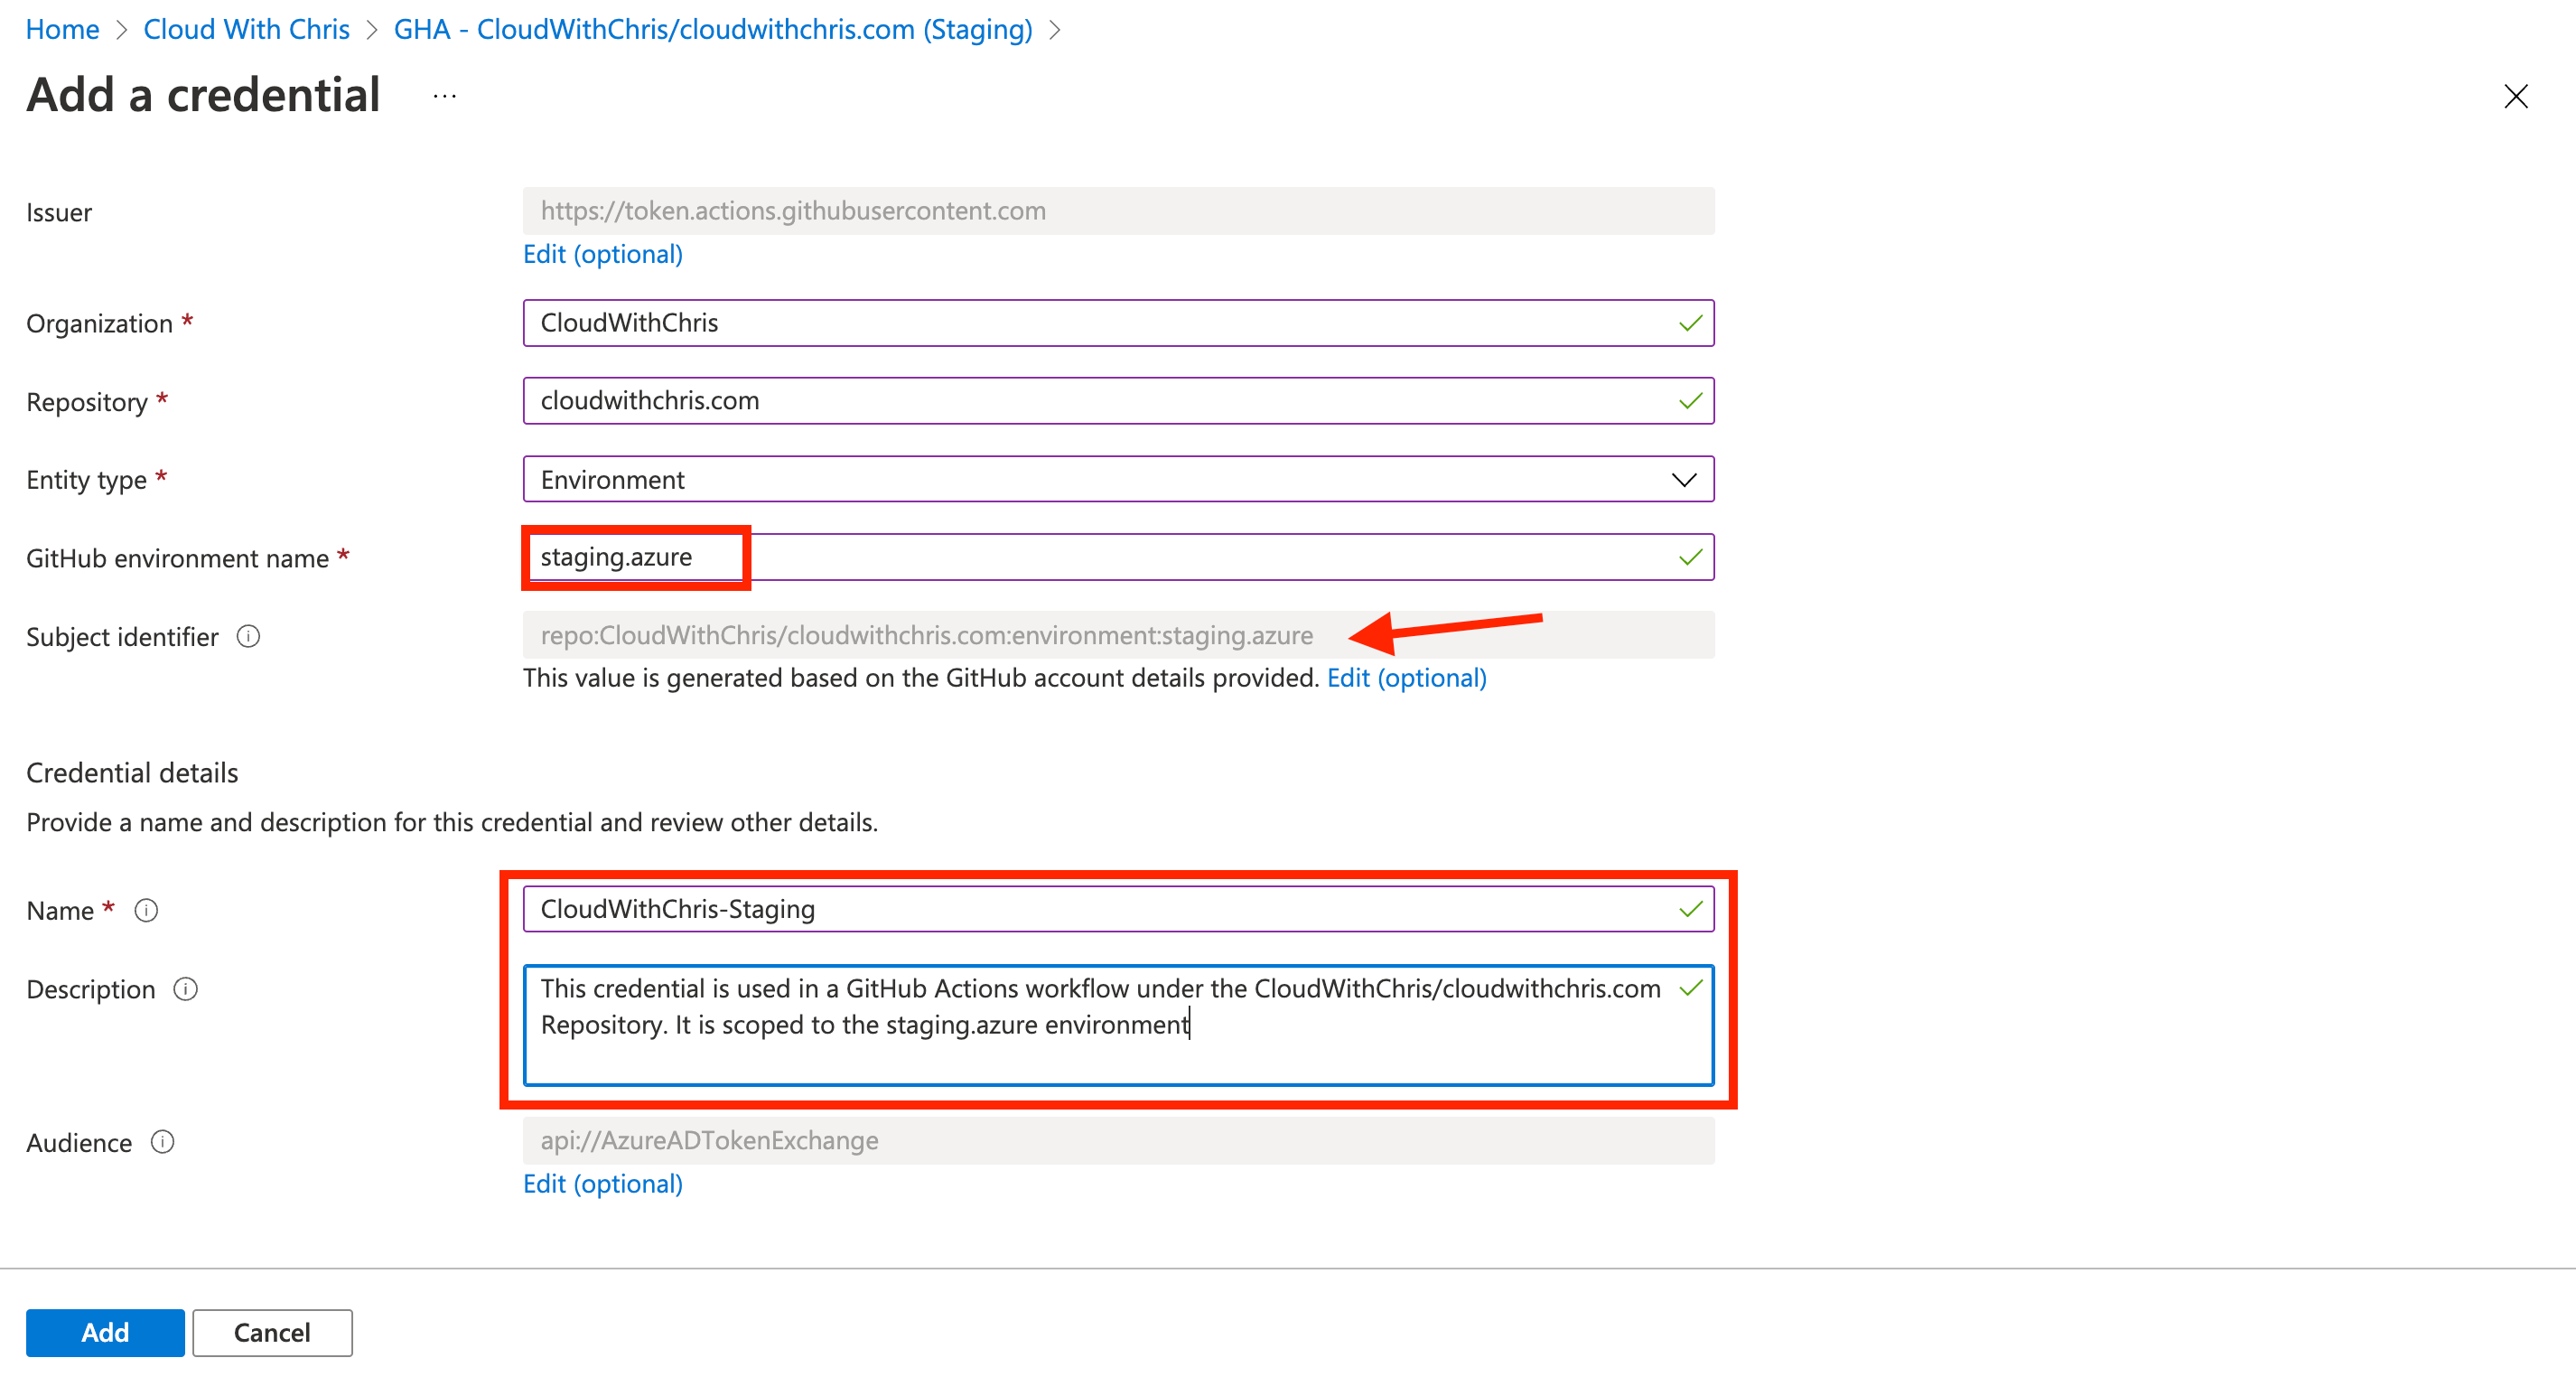 Screenshot showing the GitHub environment name as staging.azure. The name of the Credential is CloudWithChris-Staging, and has a descriptive description.